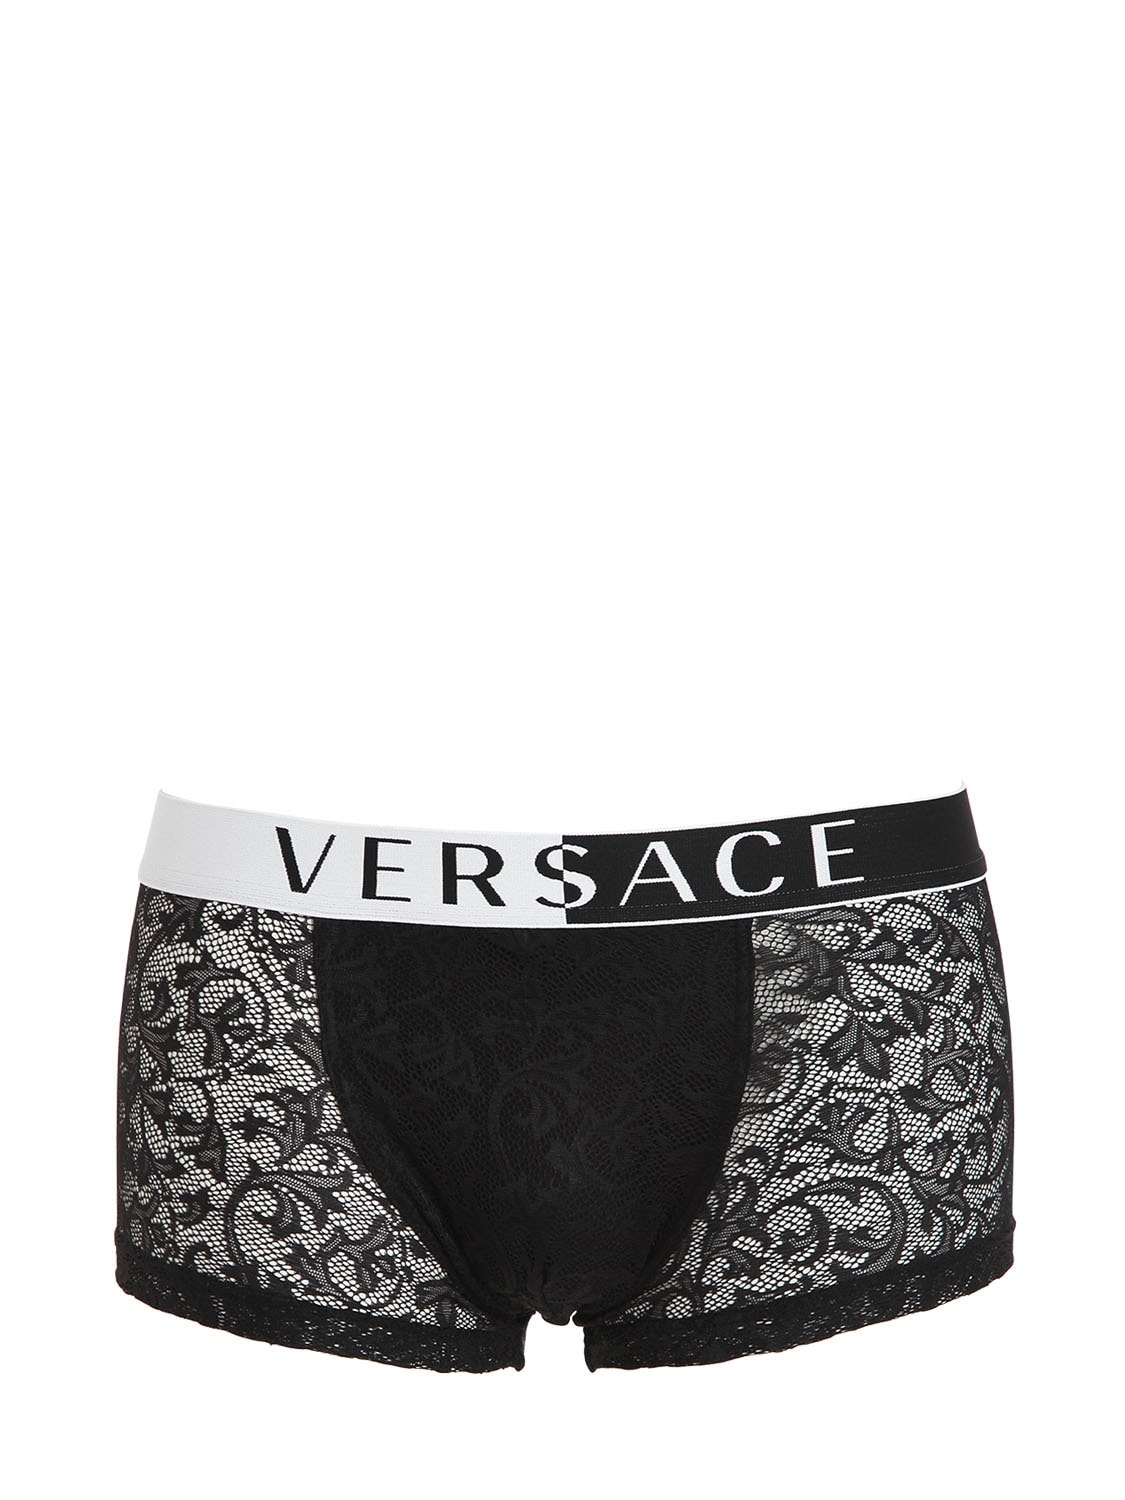 Versace Stretch Lace Boxer Briefs In Black